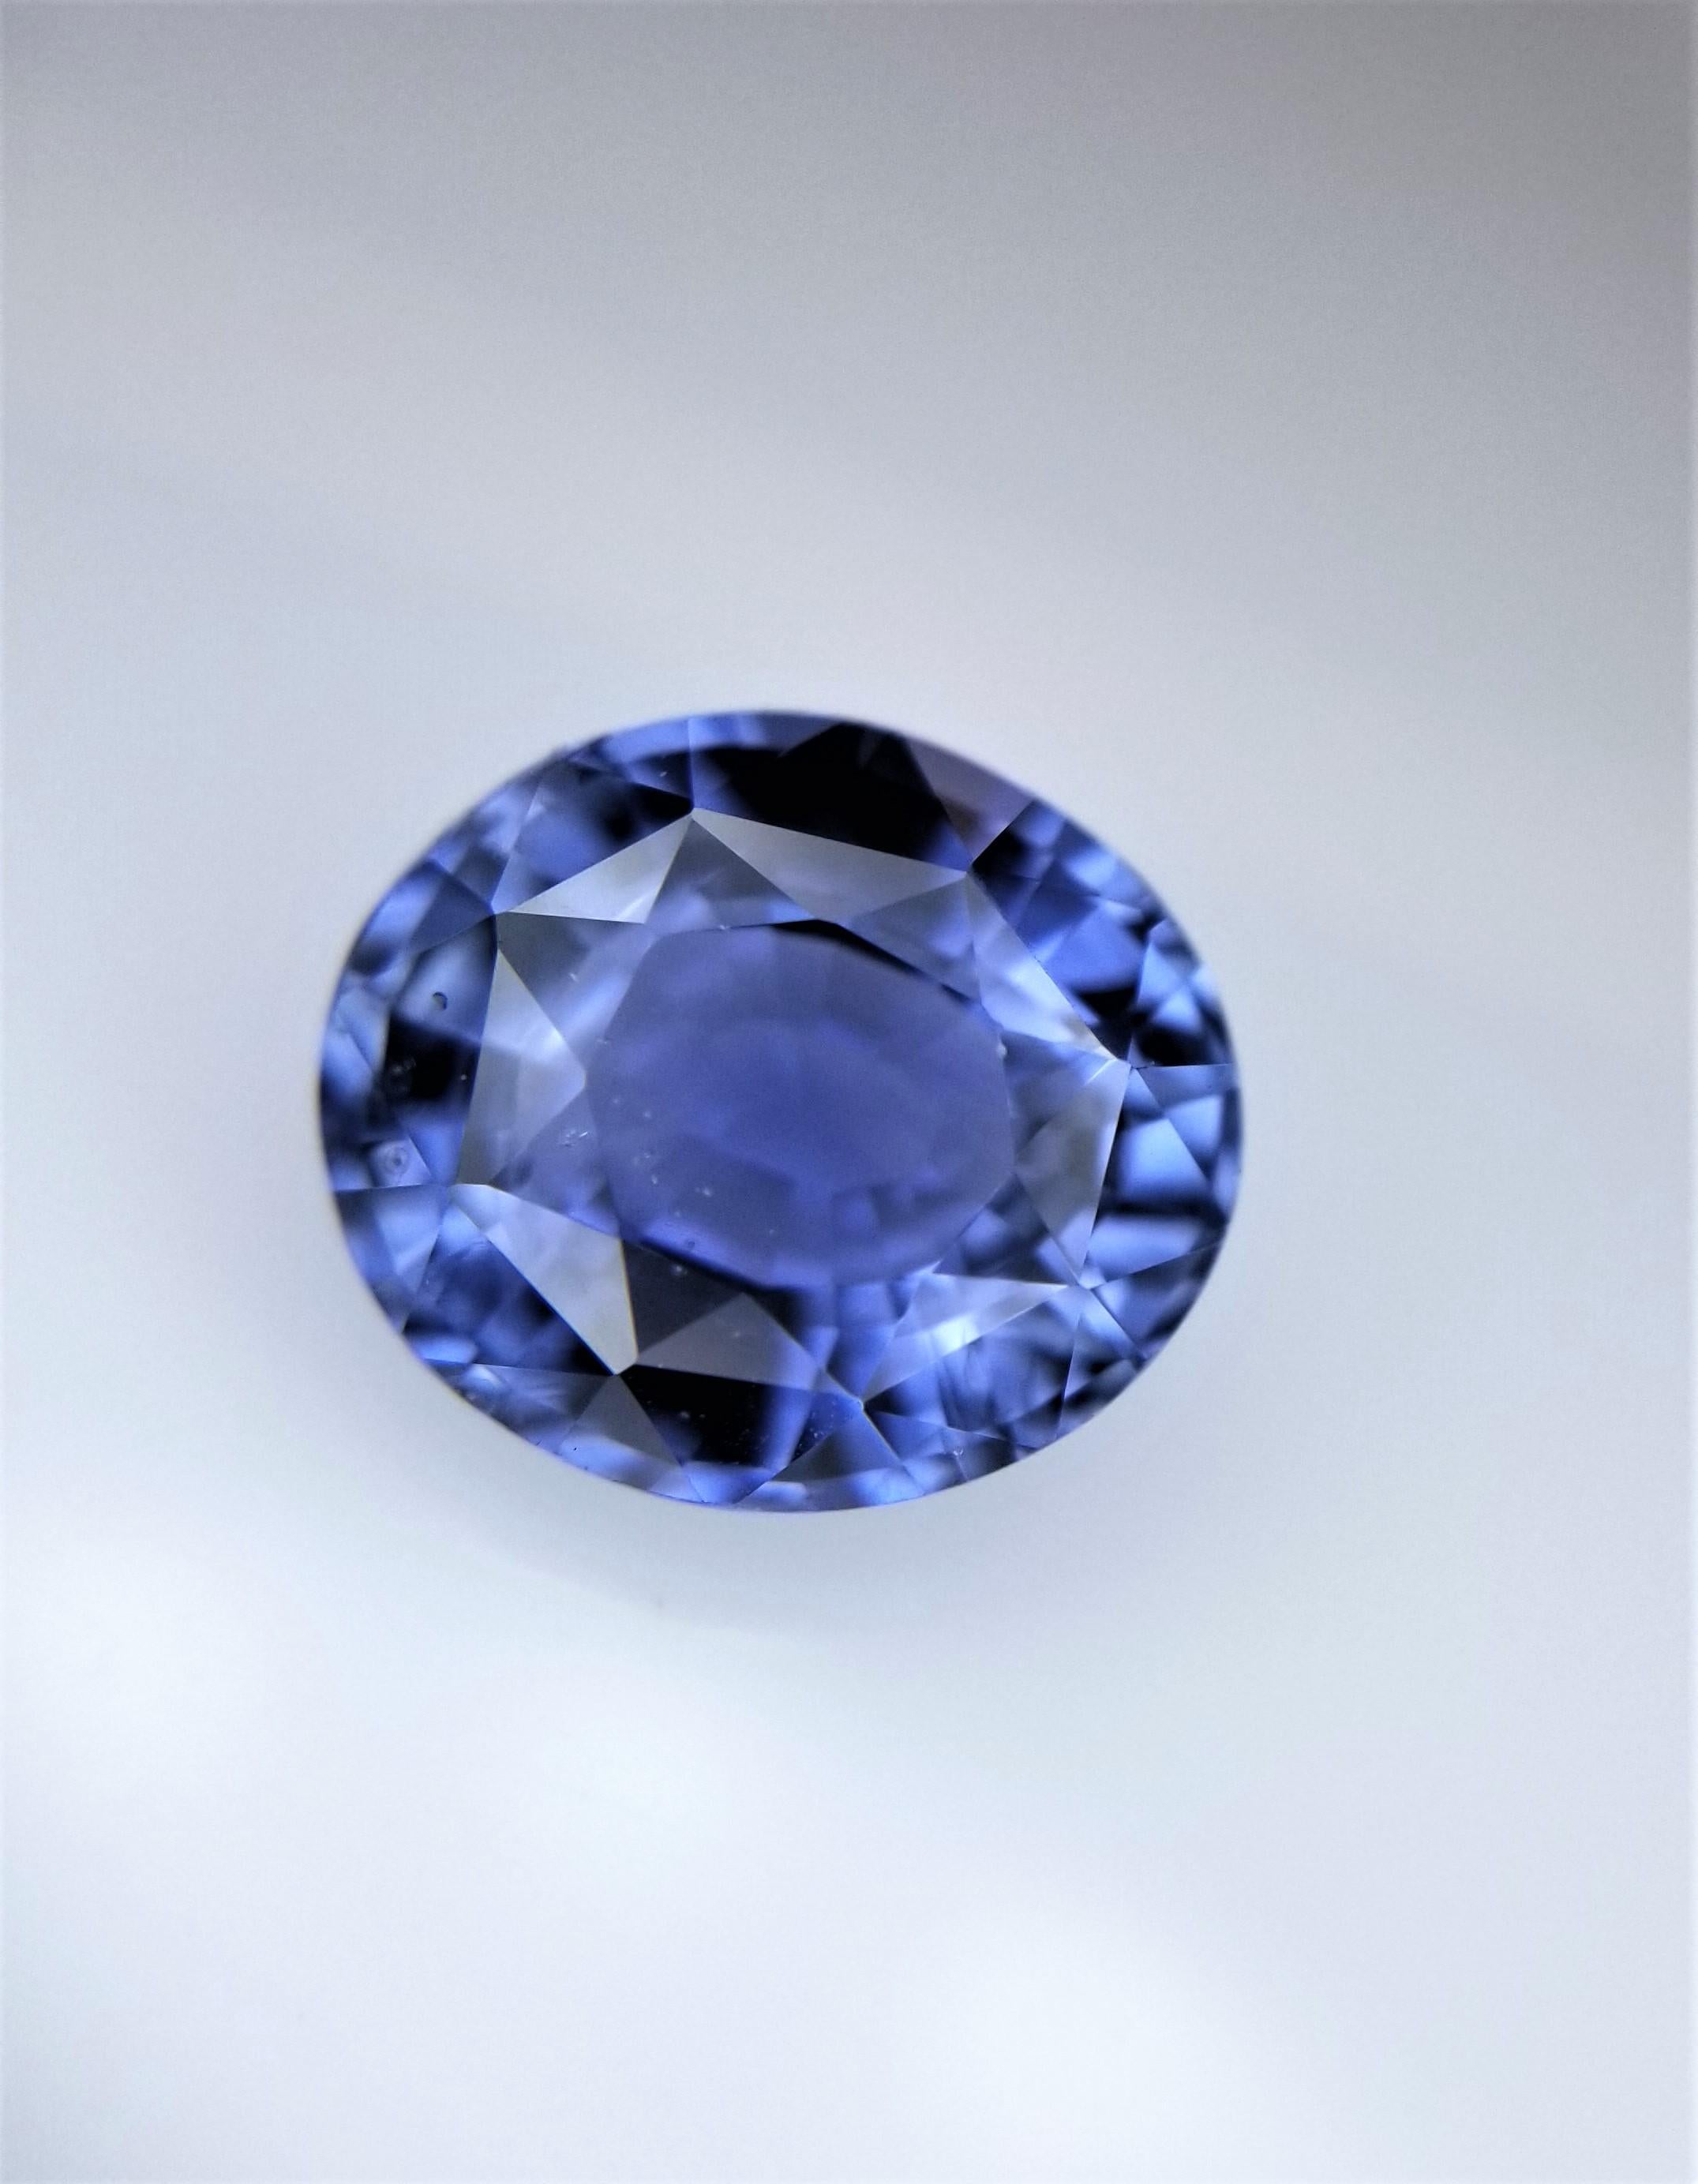 Referred to as the ultimate blue gemstone, we have an amazing selection of beautiful sapphires. If your birthday falls in September, then your birthstone is the celestial sapphire. For centuries, the sapphire has been referred to as the ultimate